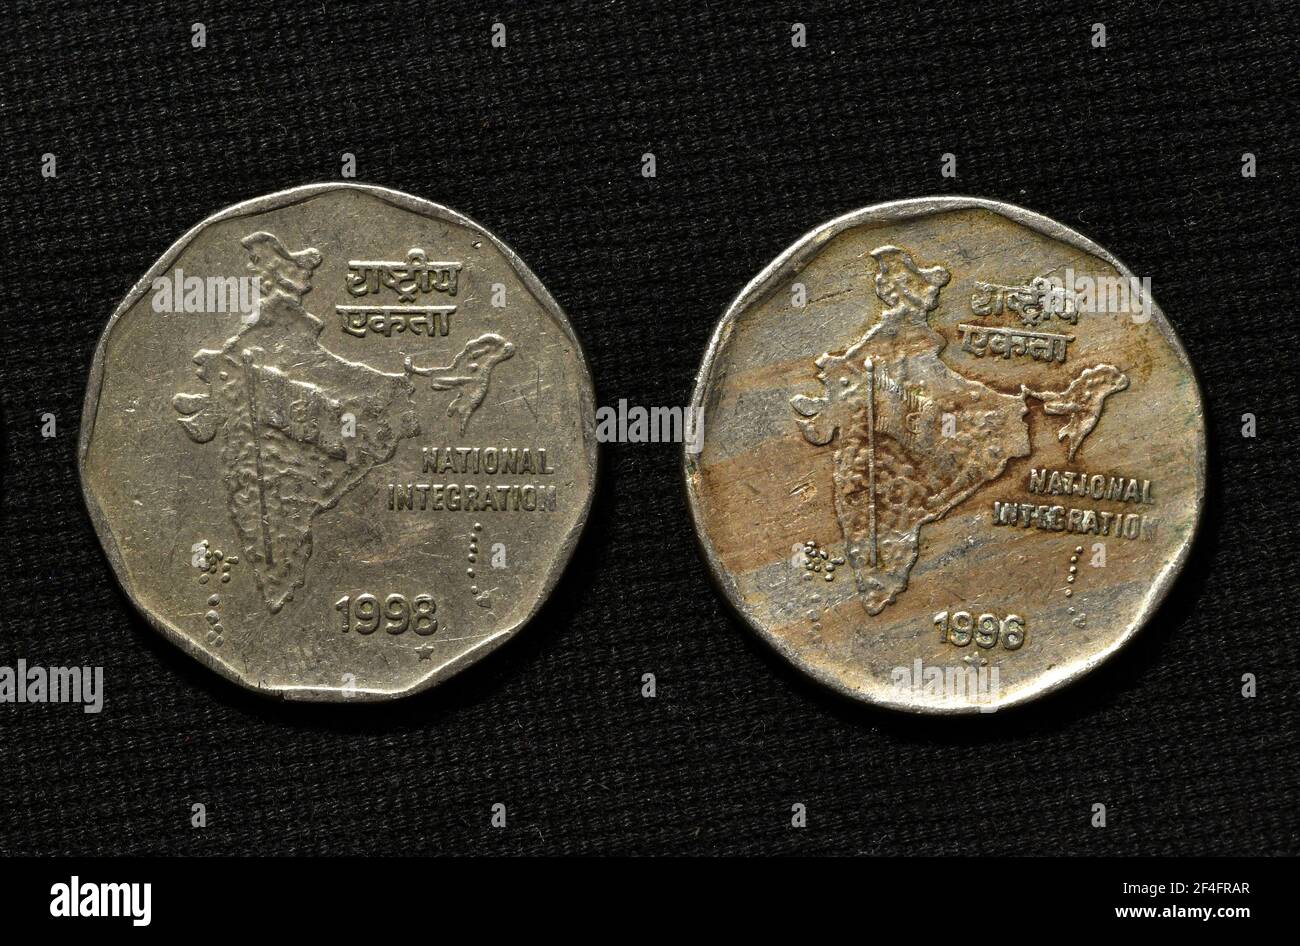 Indian coins images. Coins in India are presently being issued in ...